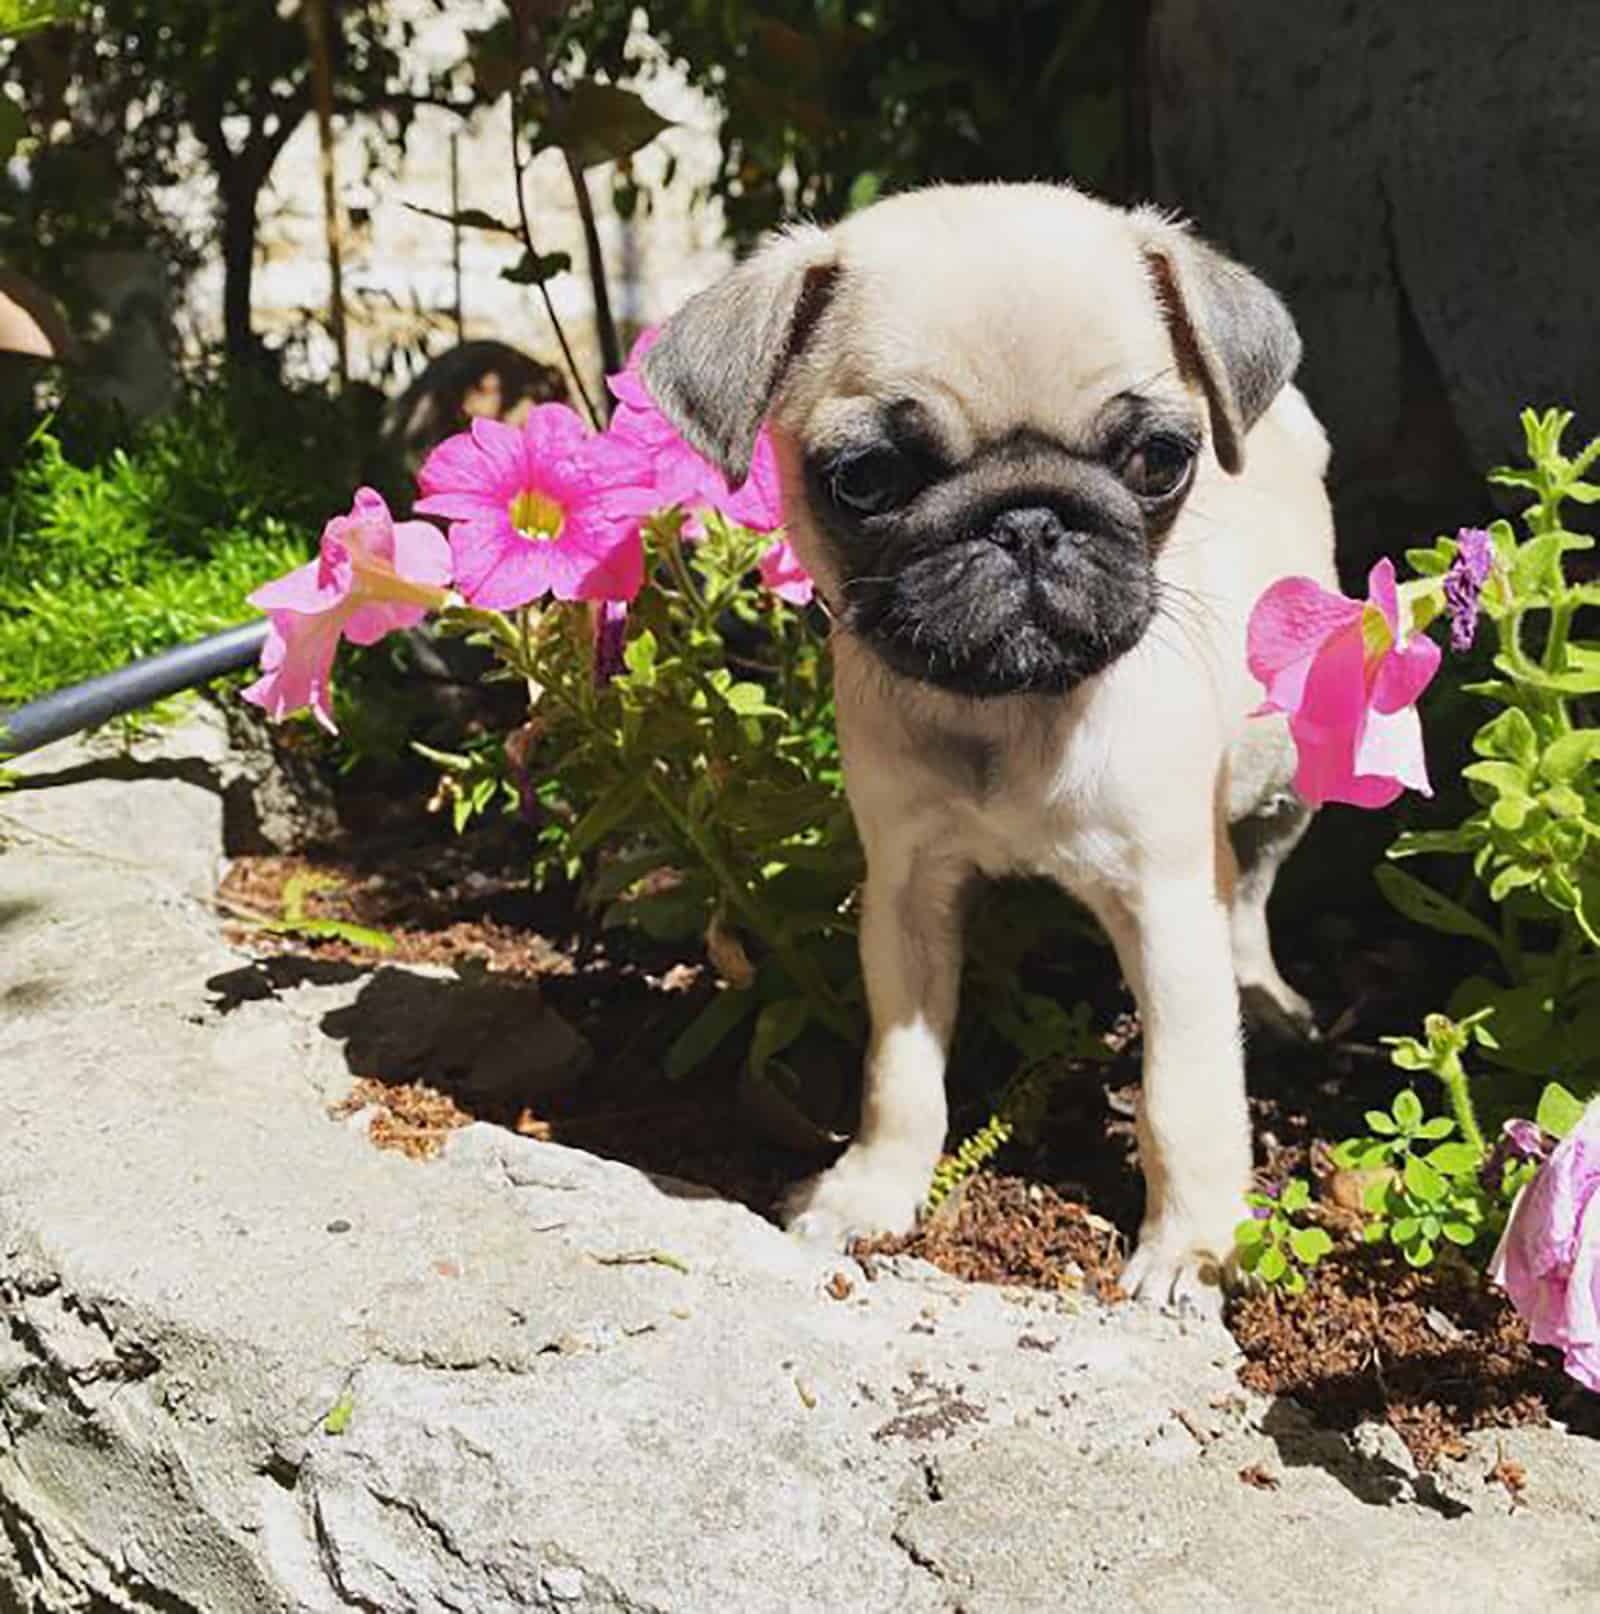 teacup pug standing in the garden among flowers